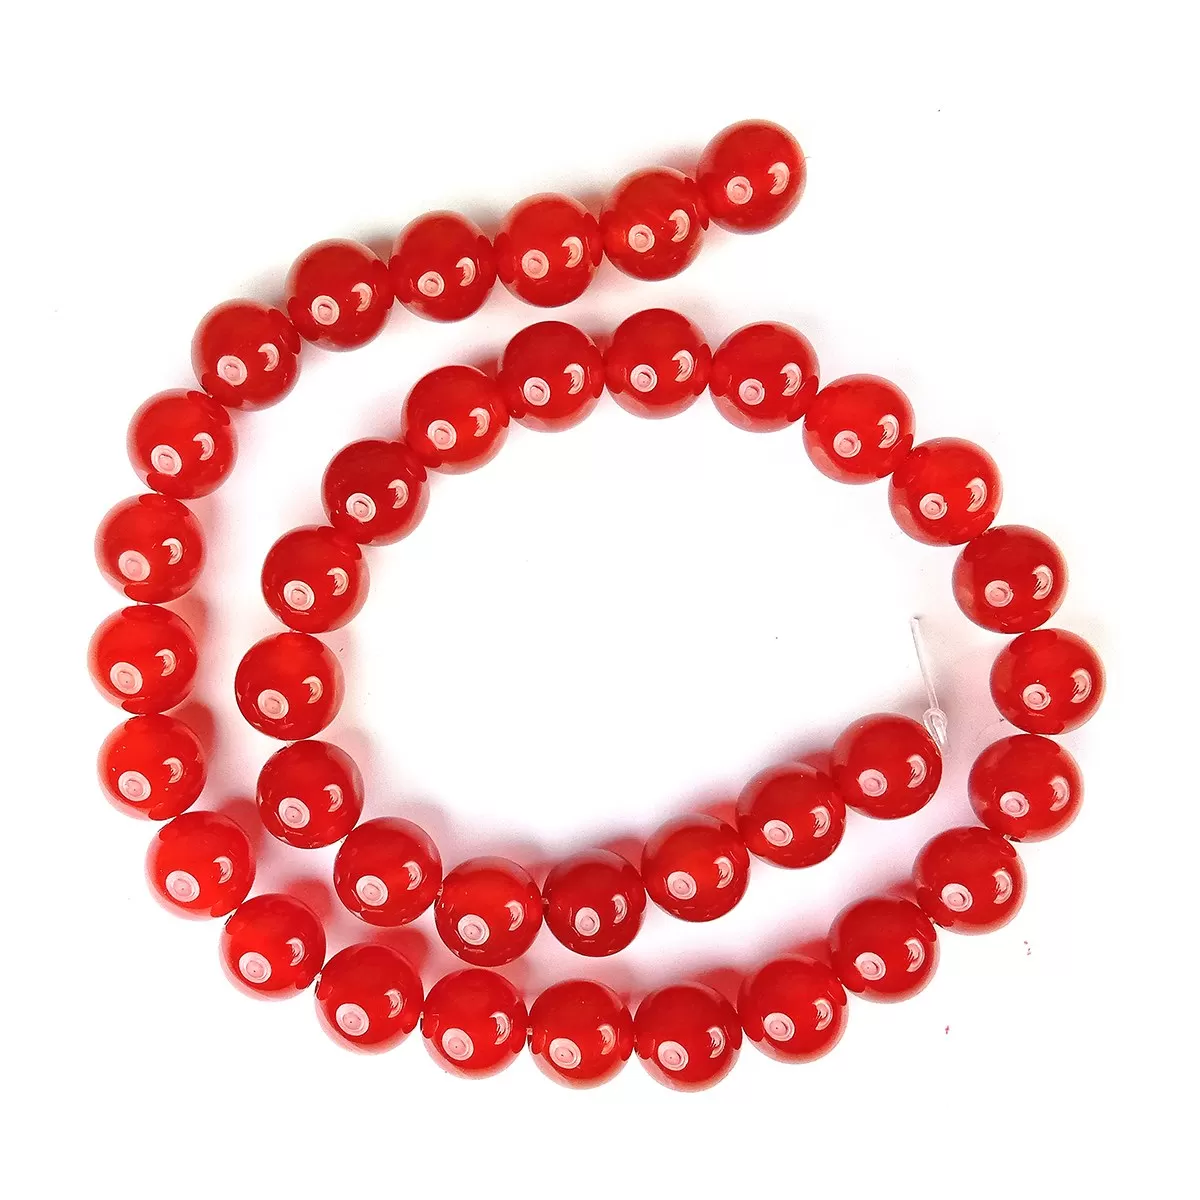 Red Onyx Loose Beads 10 mm Stone Beads for Jewellery Making Bracelet Beads Mala Beads Crystal Beads for Jewellery Making Necklace/Bracelet/Mala